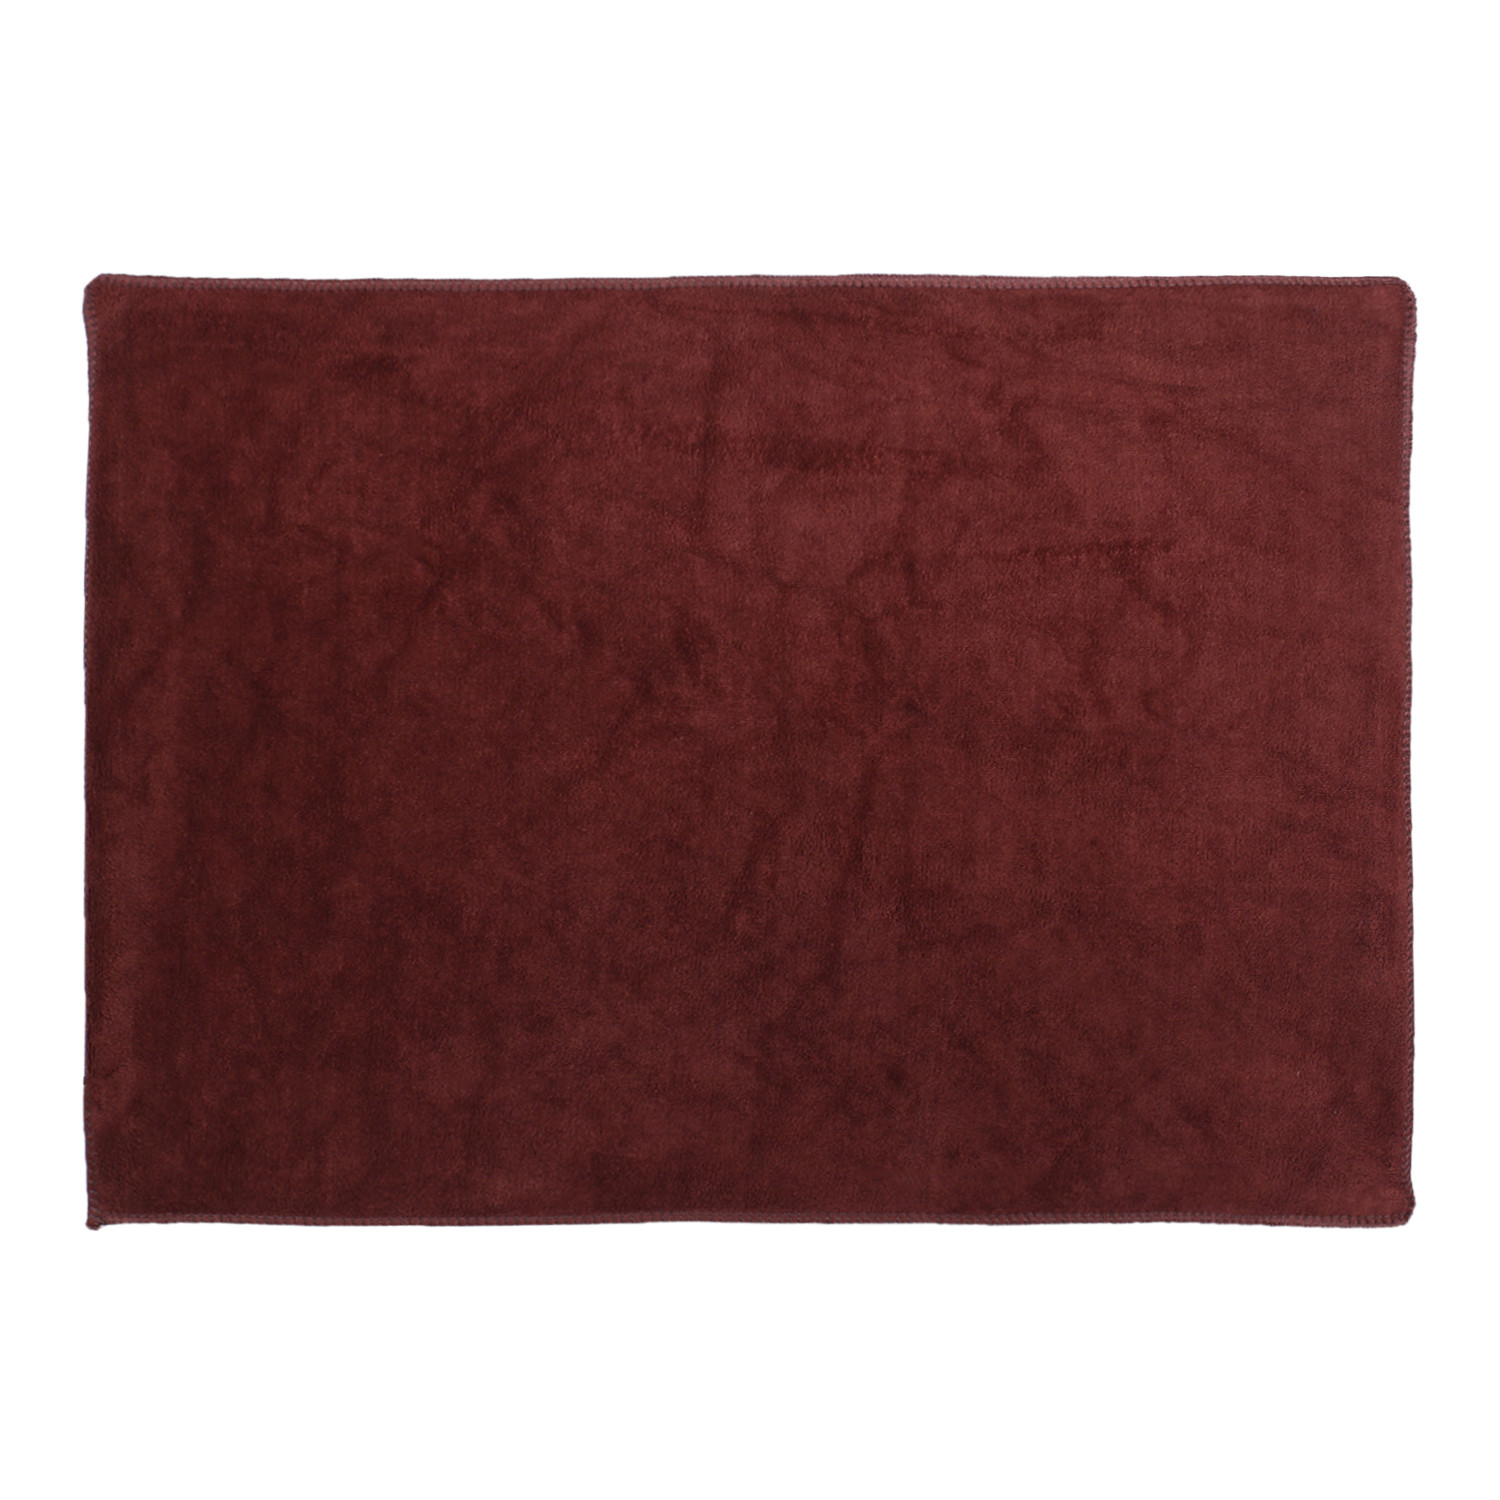 Kuber Industries Cleaning Cloths|Microfiber Highly Absorbent Wash Towels for Kitchen,Car,Window,24 x 16 Inch (Brown)